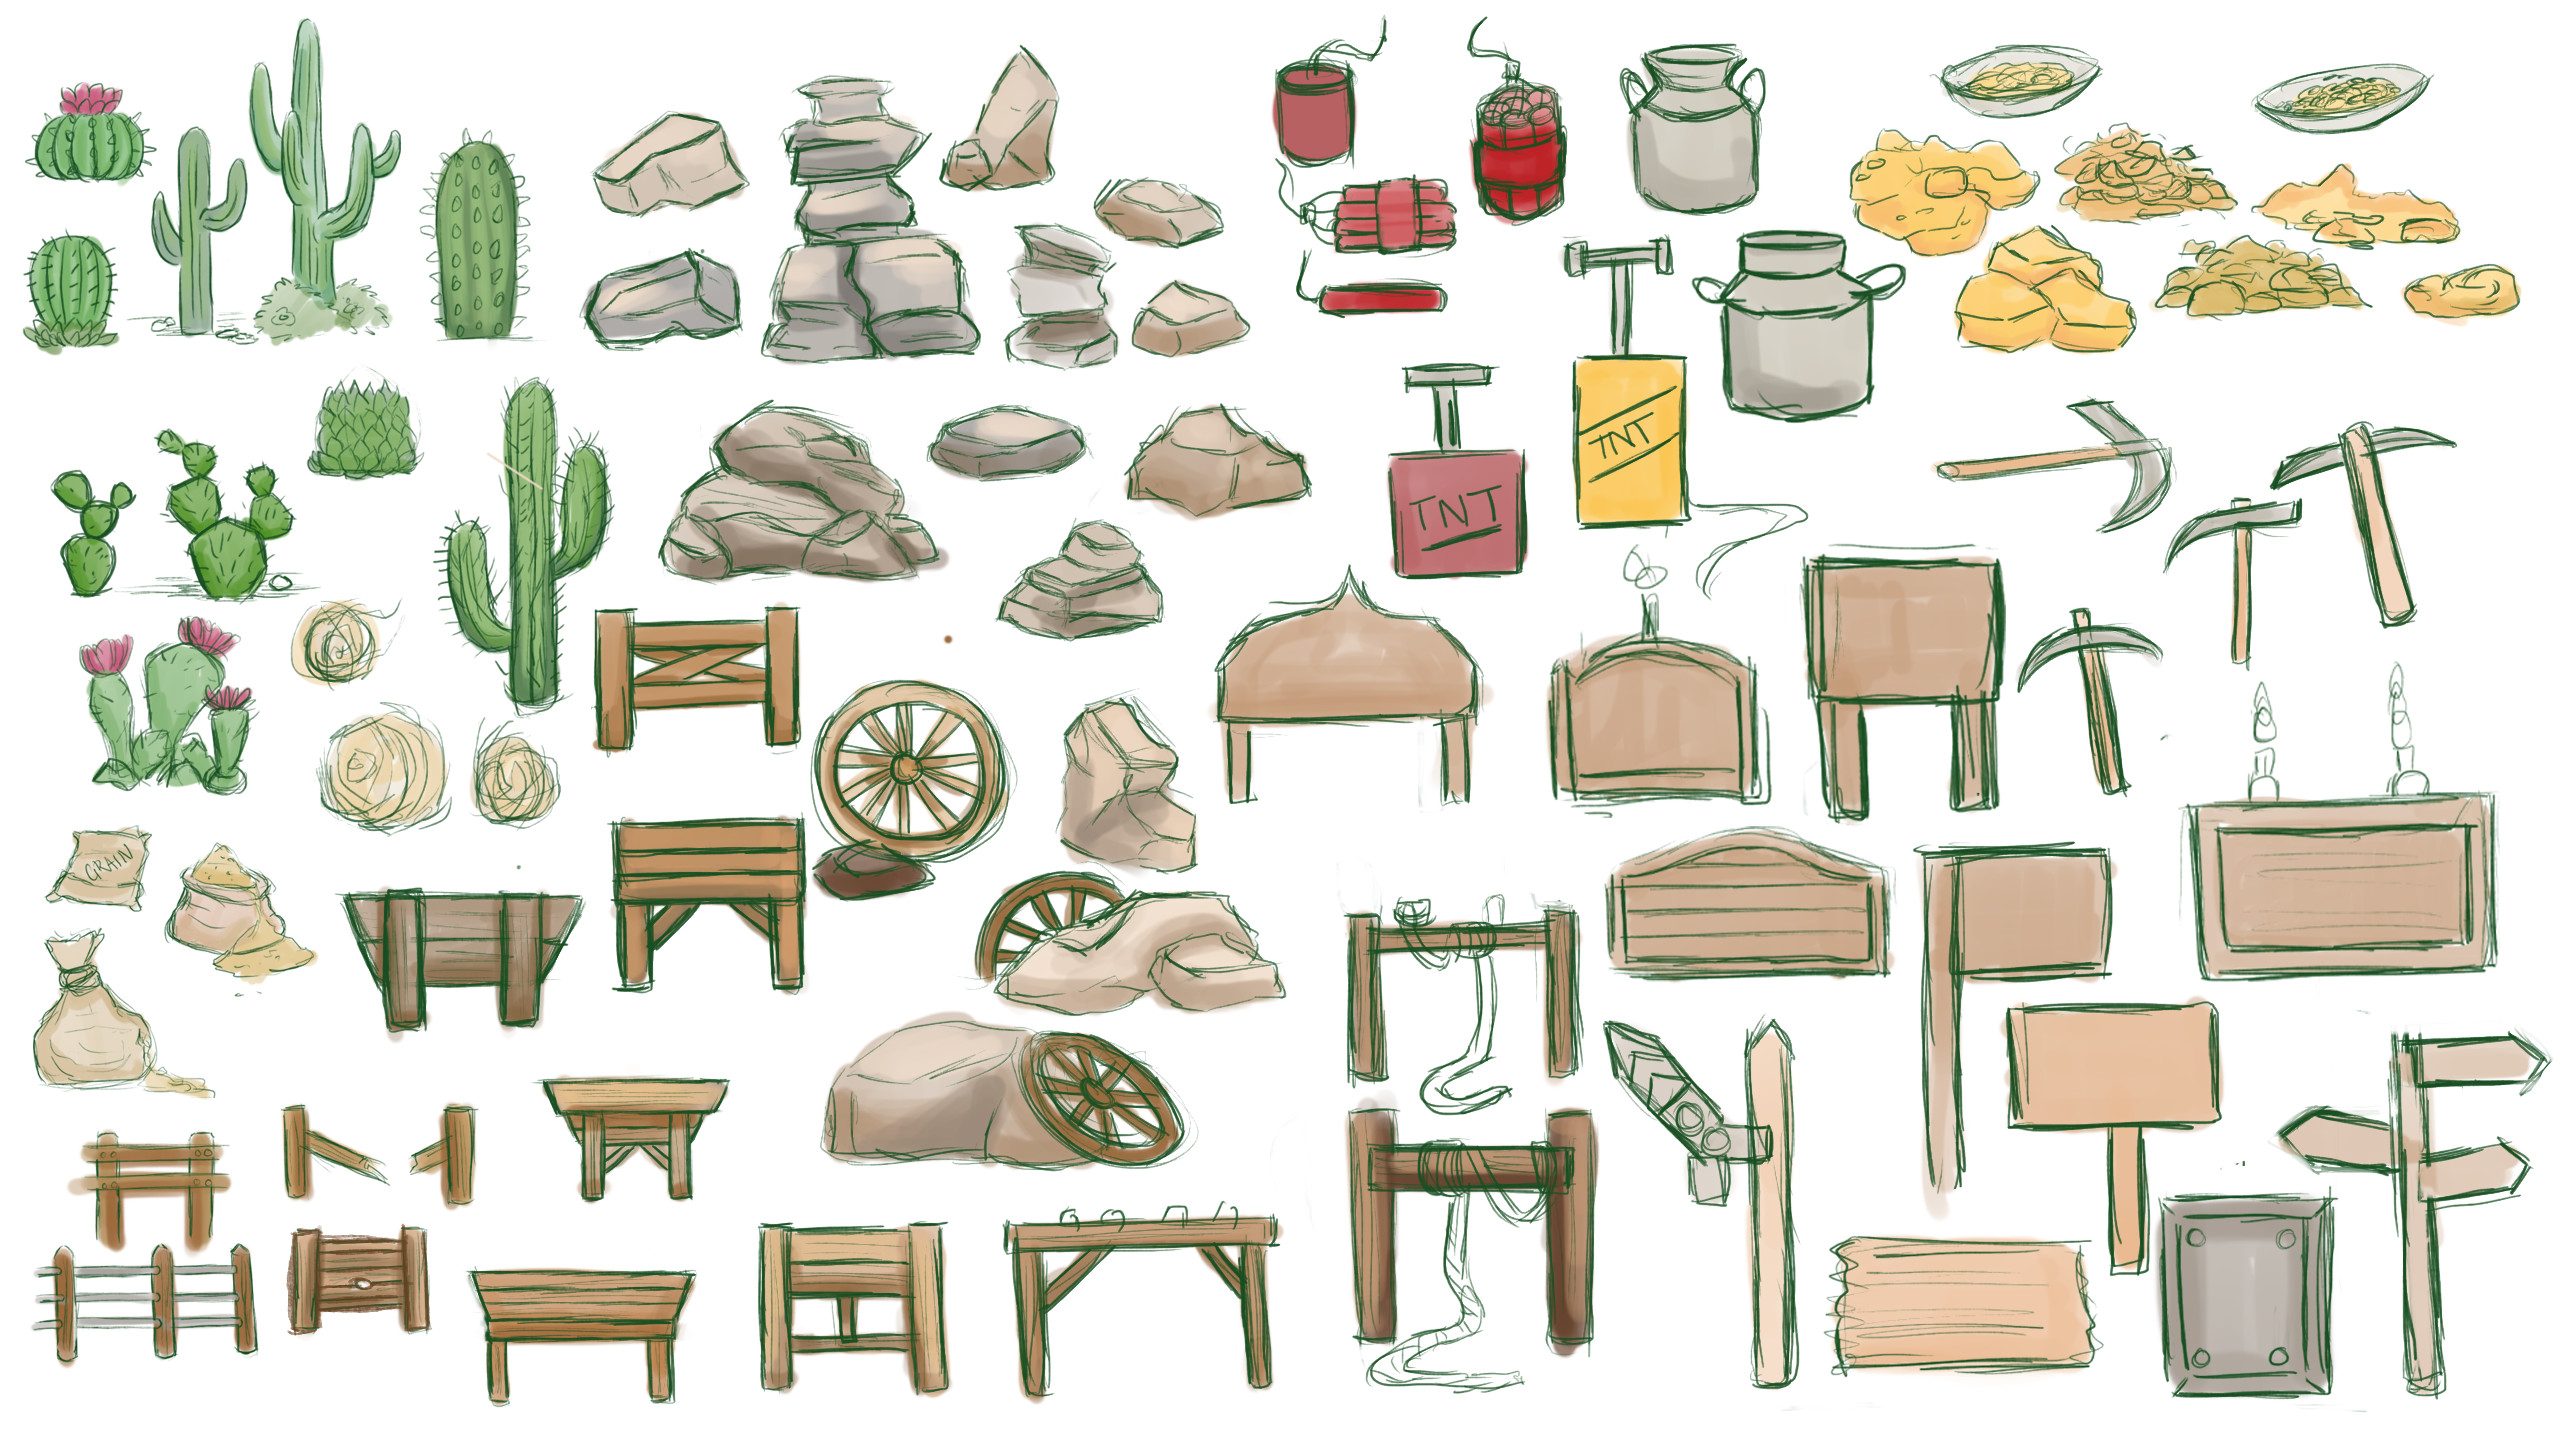 Further ideation for the assets! I got so carried away I needed this second whole sheet, haha